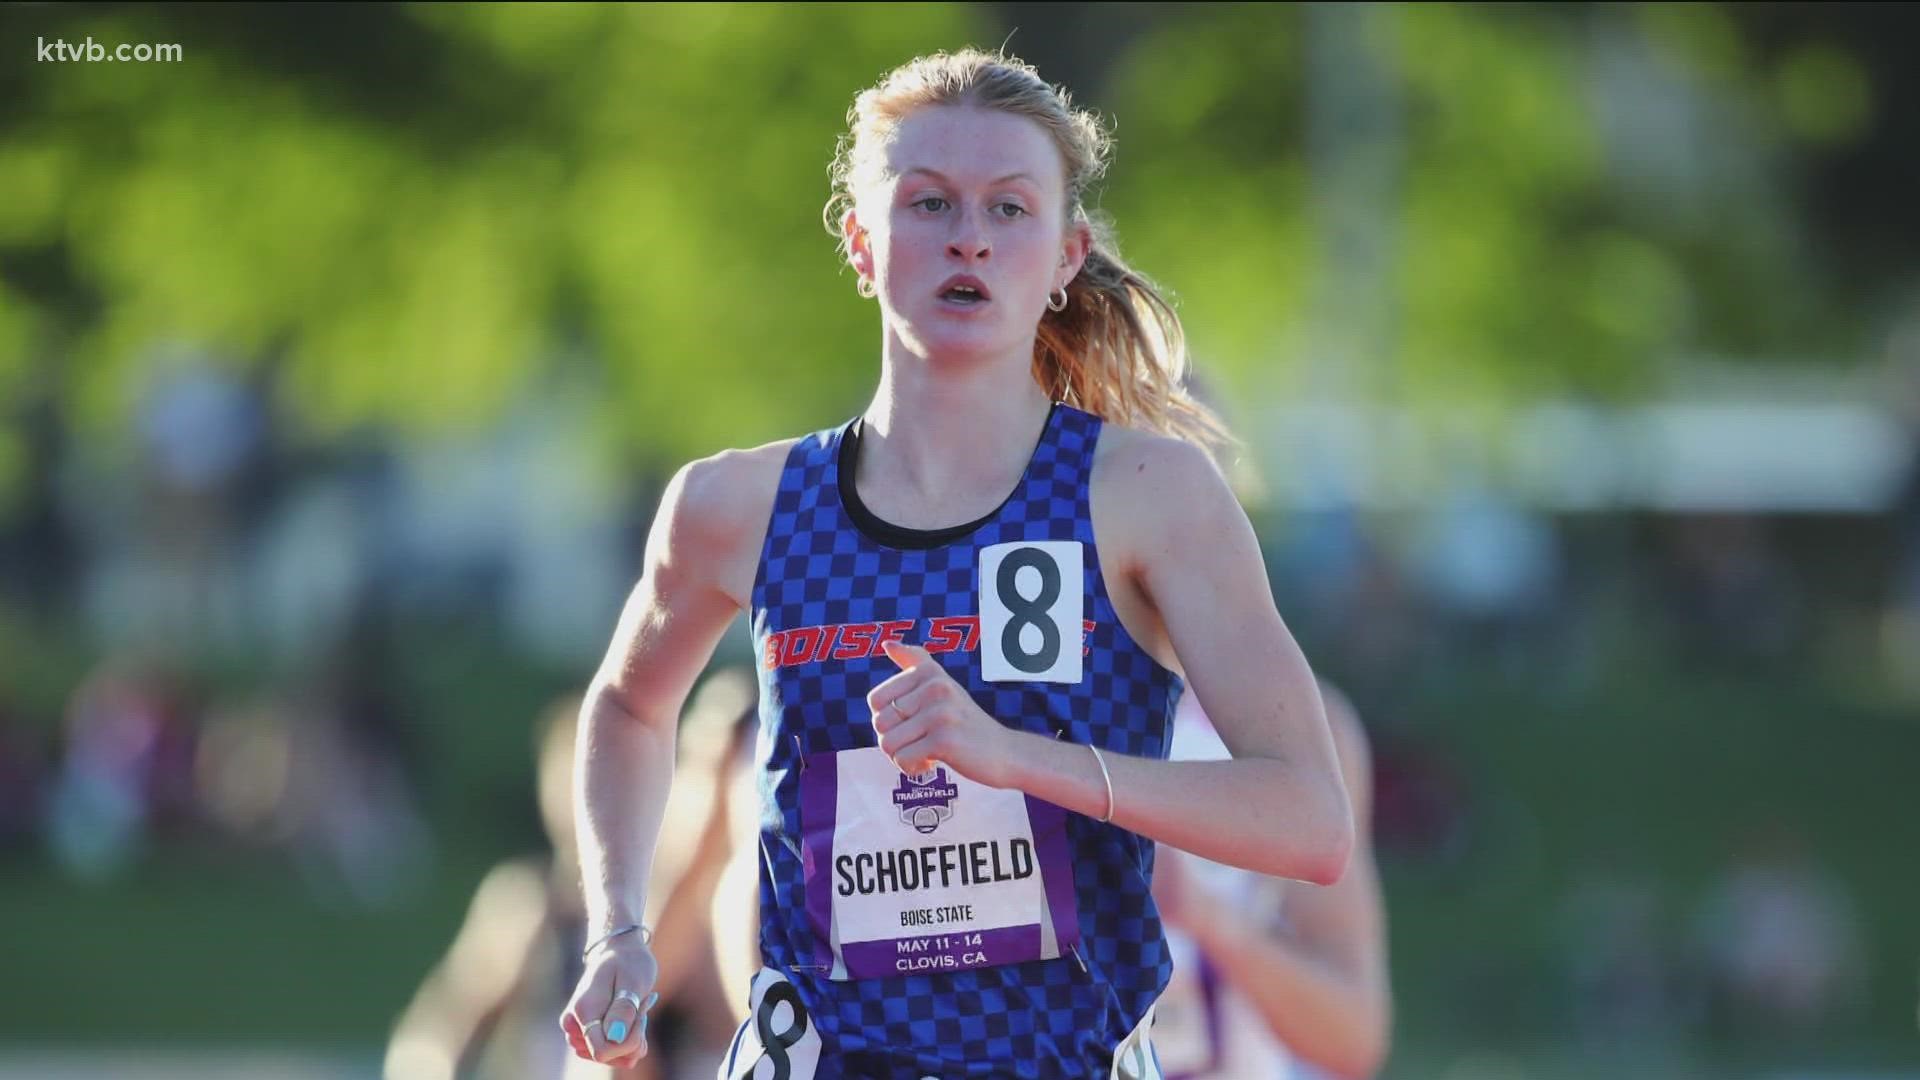 Schoffield ran a personal-best and school-record time of 2:01:41 in the NCAA 800-meter quarterfinal. The Bronco senior finished in first place in the west regional.